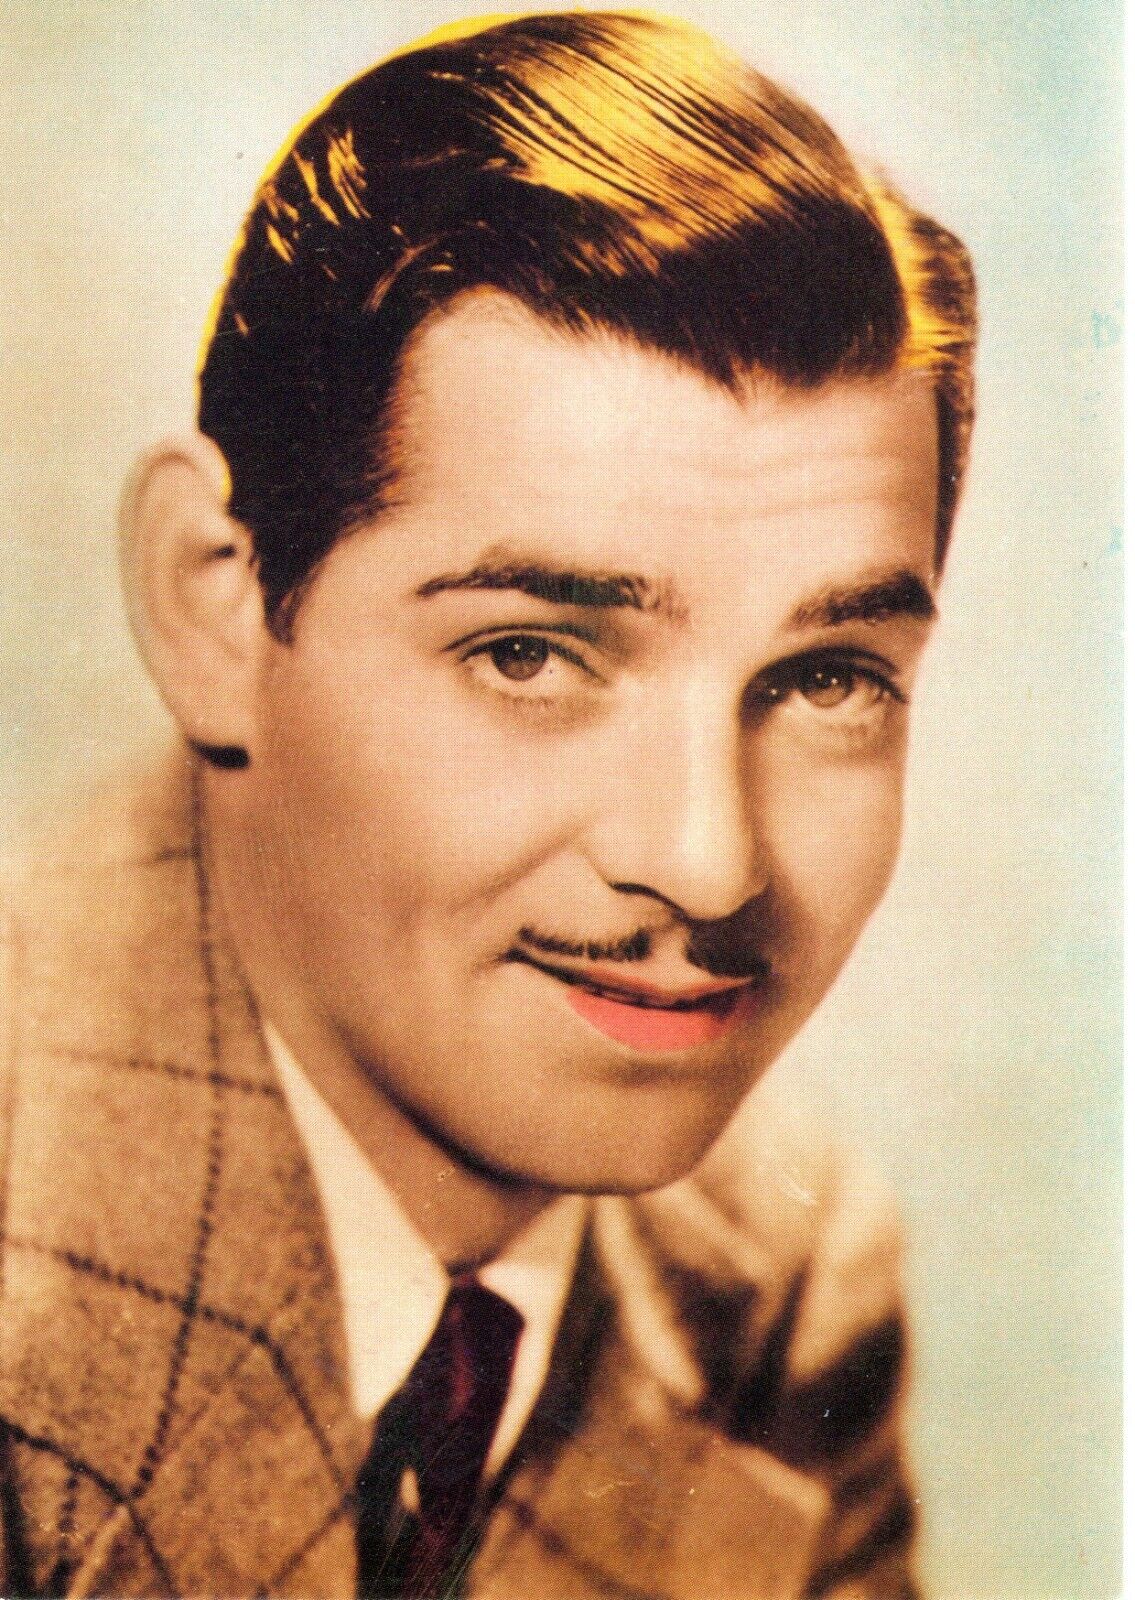 Clark Gable, Film Actor, the King of Hollywood, Reproduction Postcard